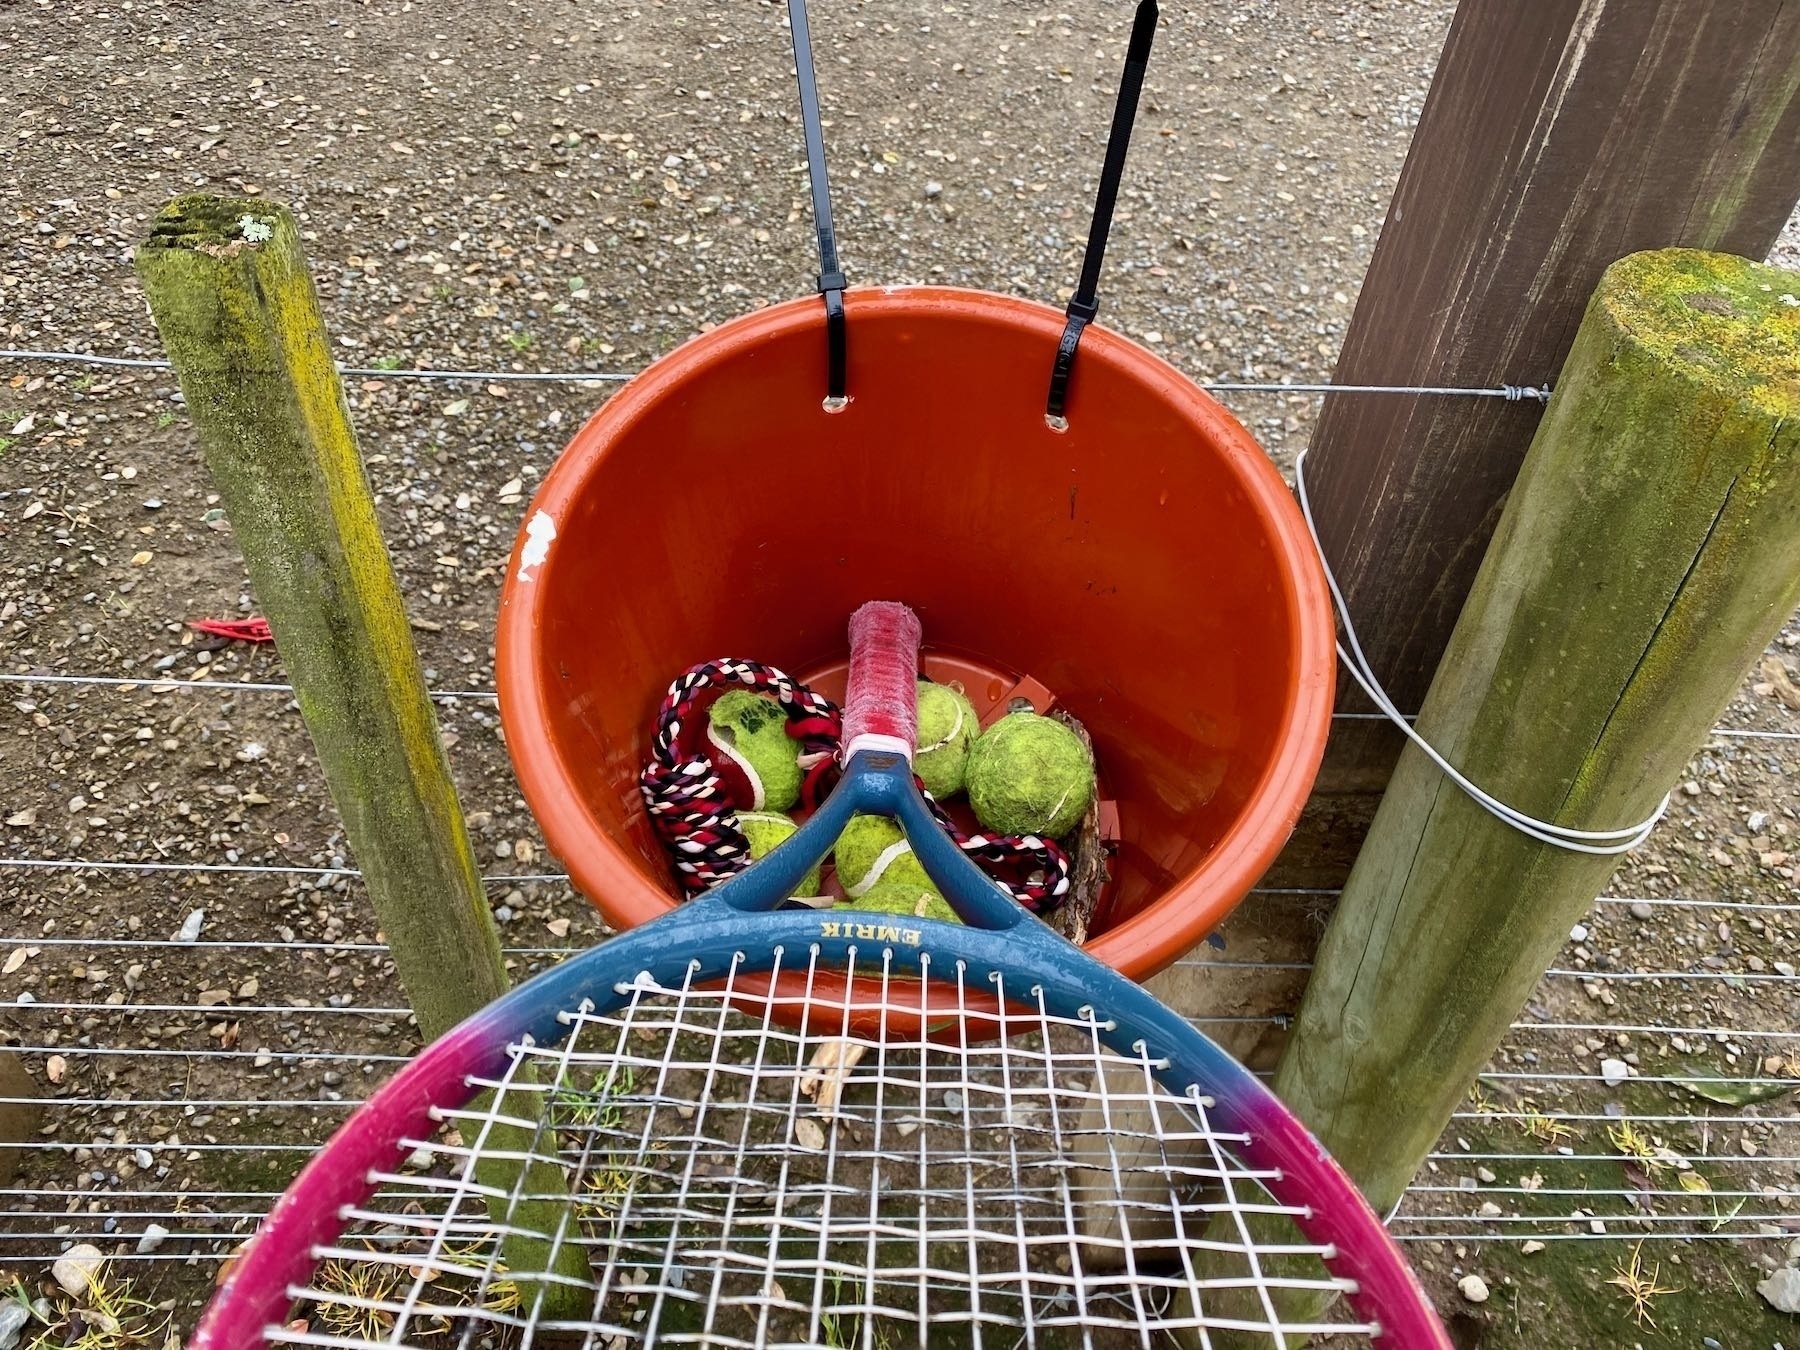 The Good Dog Library bucket also contains tennis balls and tug toys. 